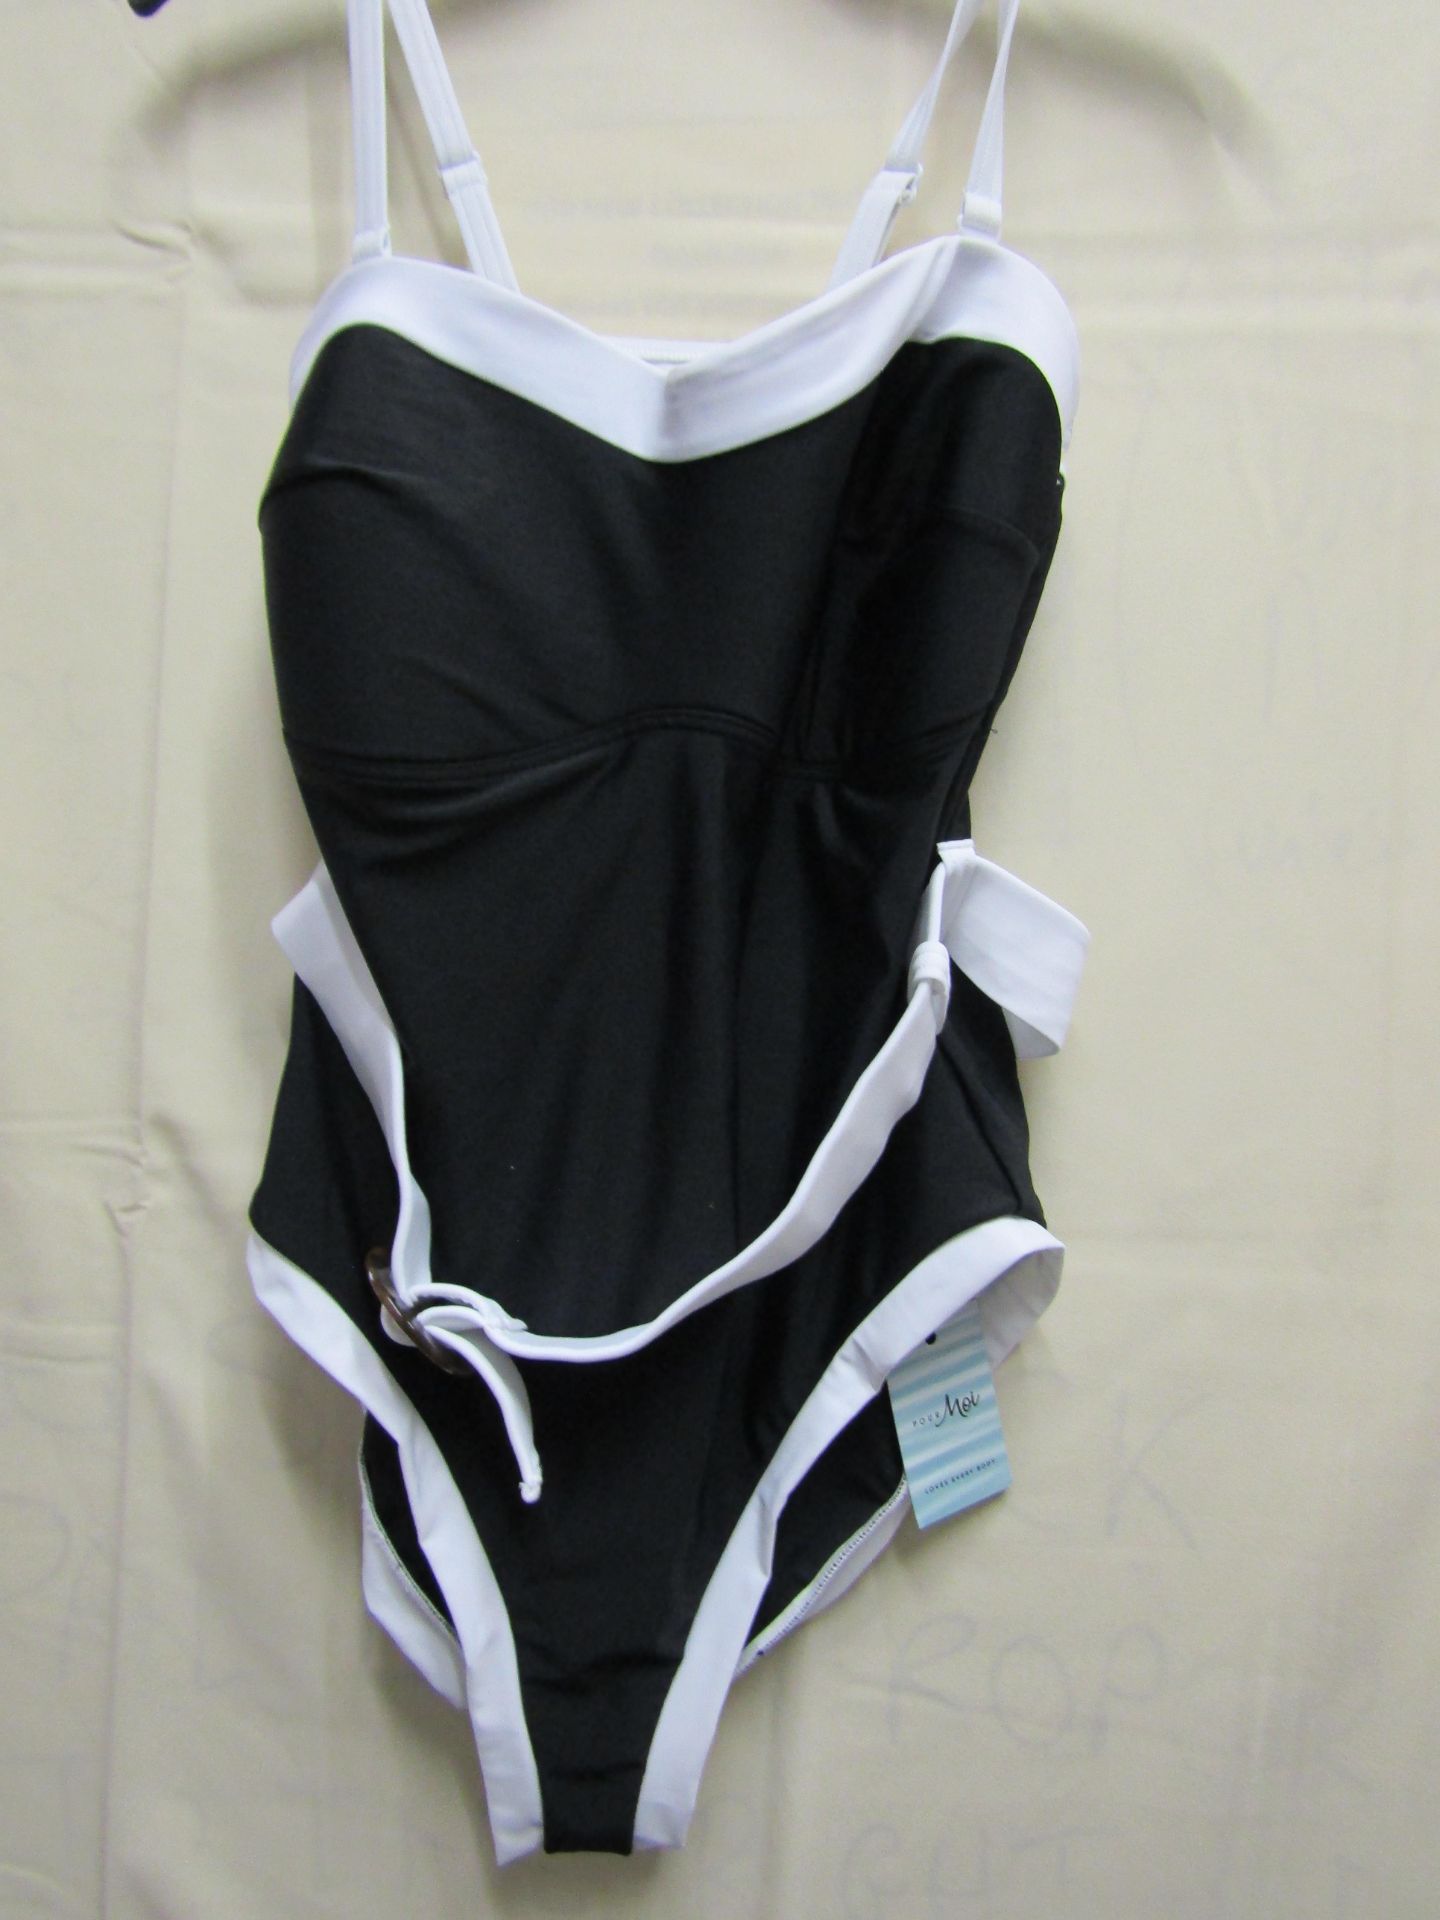 Pour Moi Swimming Costume Black/White Belted Control Removeable Straps Size 14 New With Tags